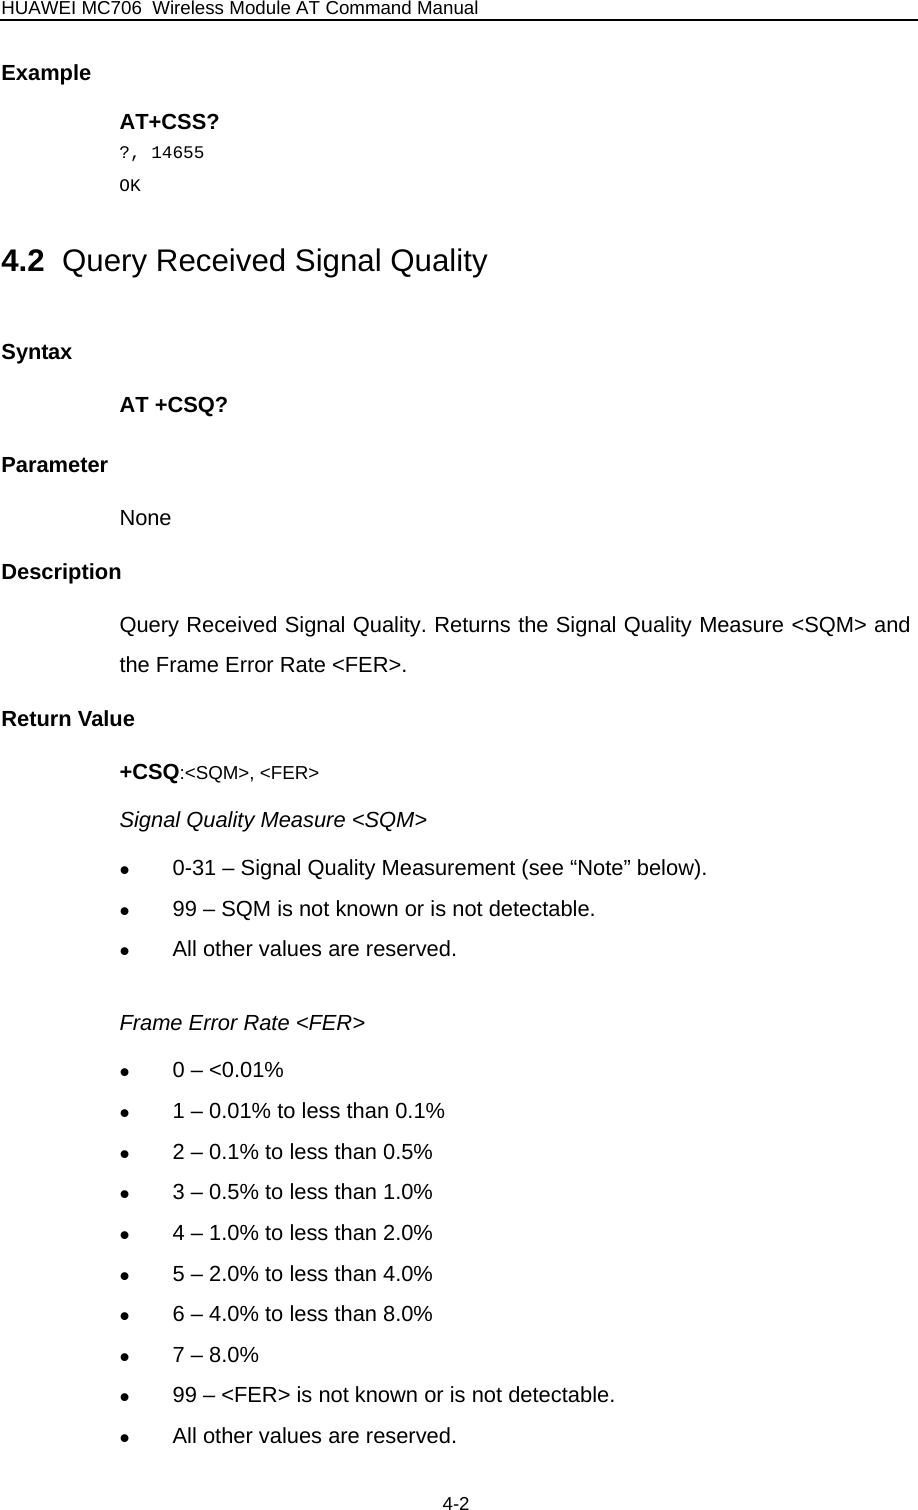 HUAWEI MC706 Wireless Module AT Command Manual  Example AT+CSS? ?, 14655 OK 4.2  Query Received Signal Quality Syntax AT +CSQ? Parameter None Description Query Received Signal Quality. Returns the Signal Quality Measure &lt;SQM&gt; and the Frame Error Rate &lt;FER&gt;. Return Value +CSQ:&lt;SQM&gt;, &lt;FER&gt; Signal Quality Measure &lt;SQM&gt; z 0-31 – Signal Quality Measurement (see “Note” below). z 99 – SQM is not known or is not detectable. z All other values are reserved.  Frame Error Rate &lt;FER&gt; z 0 – &lt;0.01% z 1 – 0.01% to less than 0.1% z 2 – 0.1% to less than 0.5% z 3 – 0.5% to less than 1.0% z 4 – 1.0% to less than 2.0% z 5 – 2.0% to less than 4.0% z 6 – 4.0% to less than 8.0% z 7 – 8.0% z 99 – &lt;FER&gt; is not known or is not detectable. z All other values are reserved. 4-2 